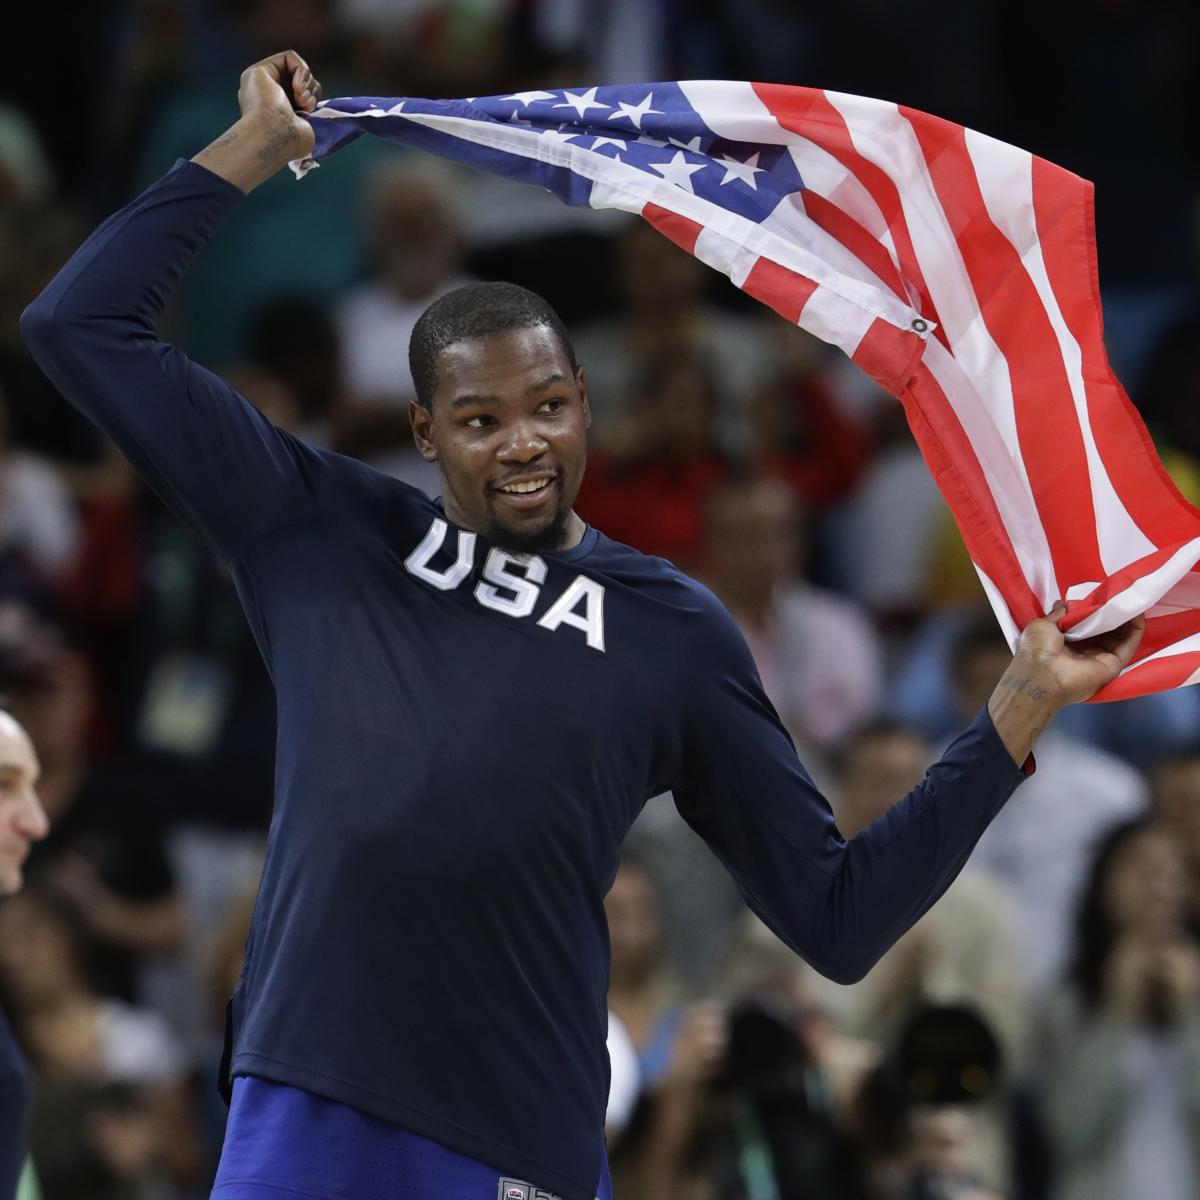 Durant Lillard And Usa Men S Basketball Team Roster For 21 Tokyo Olympics News Update